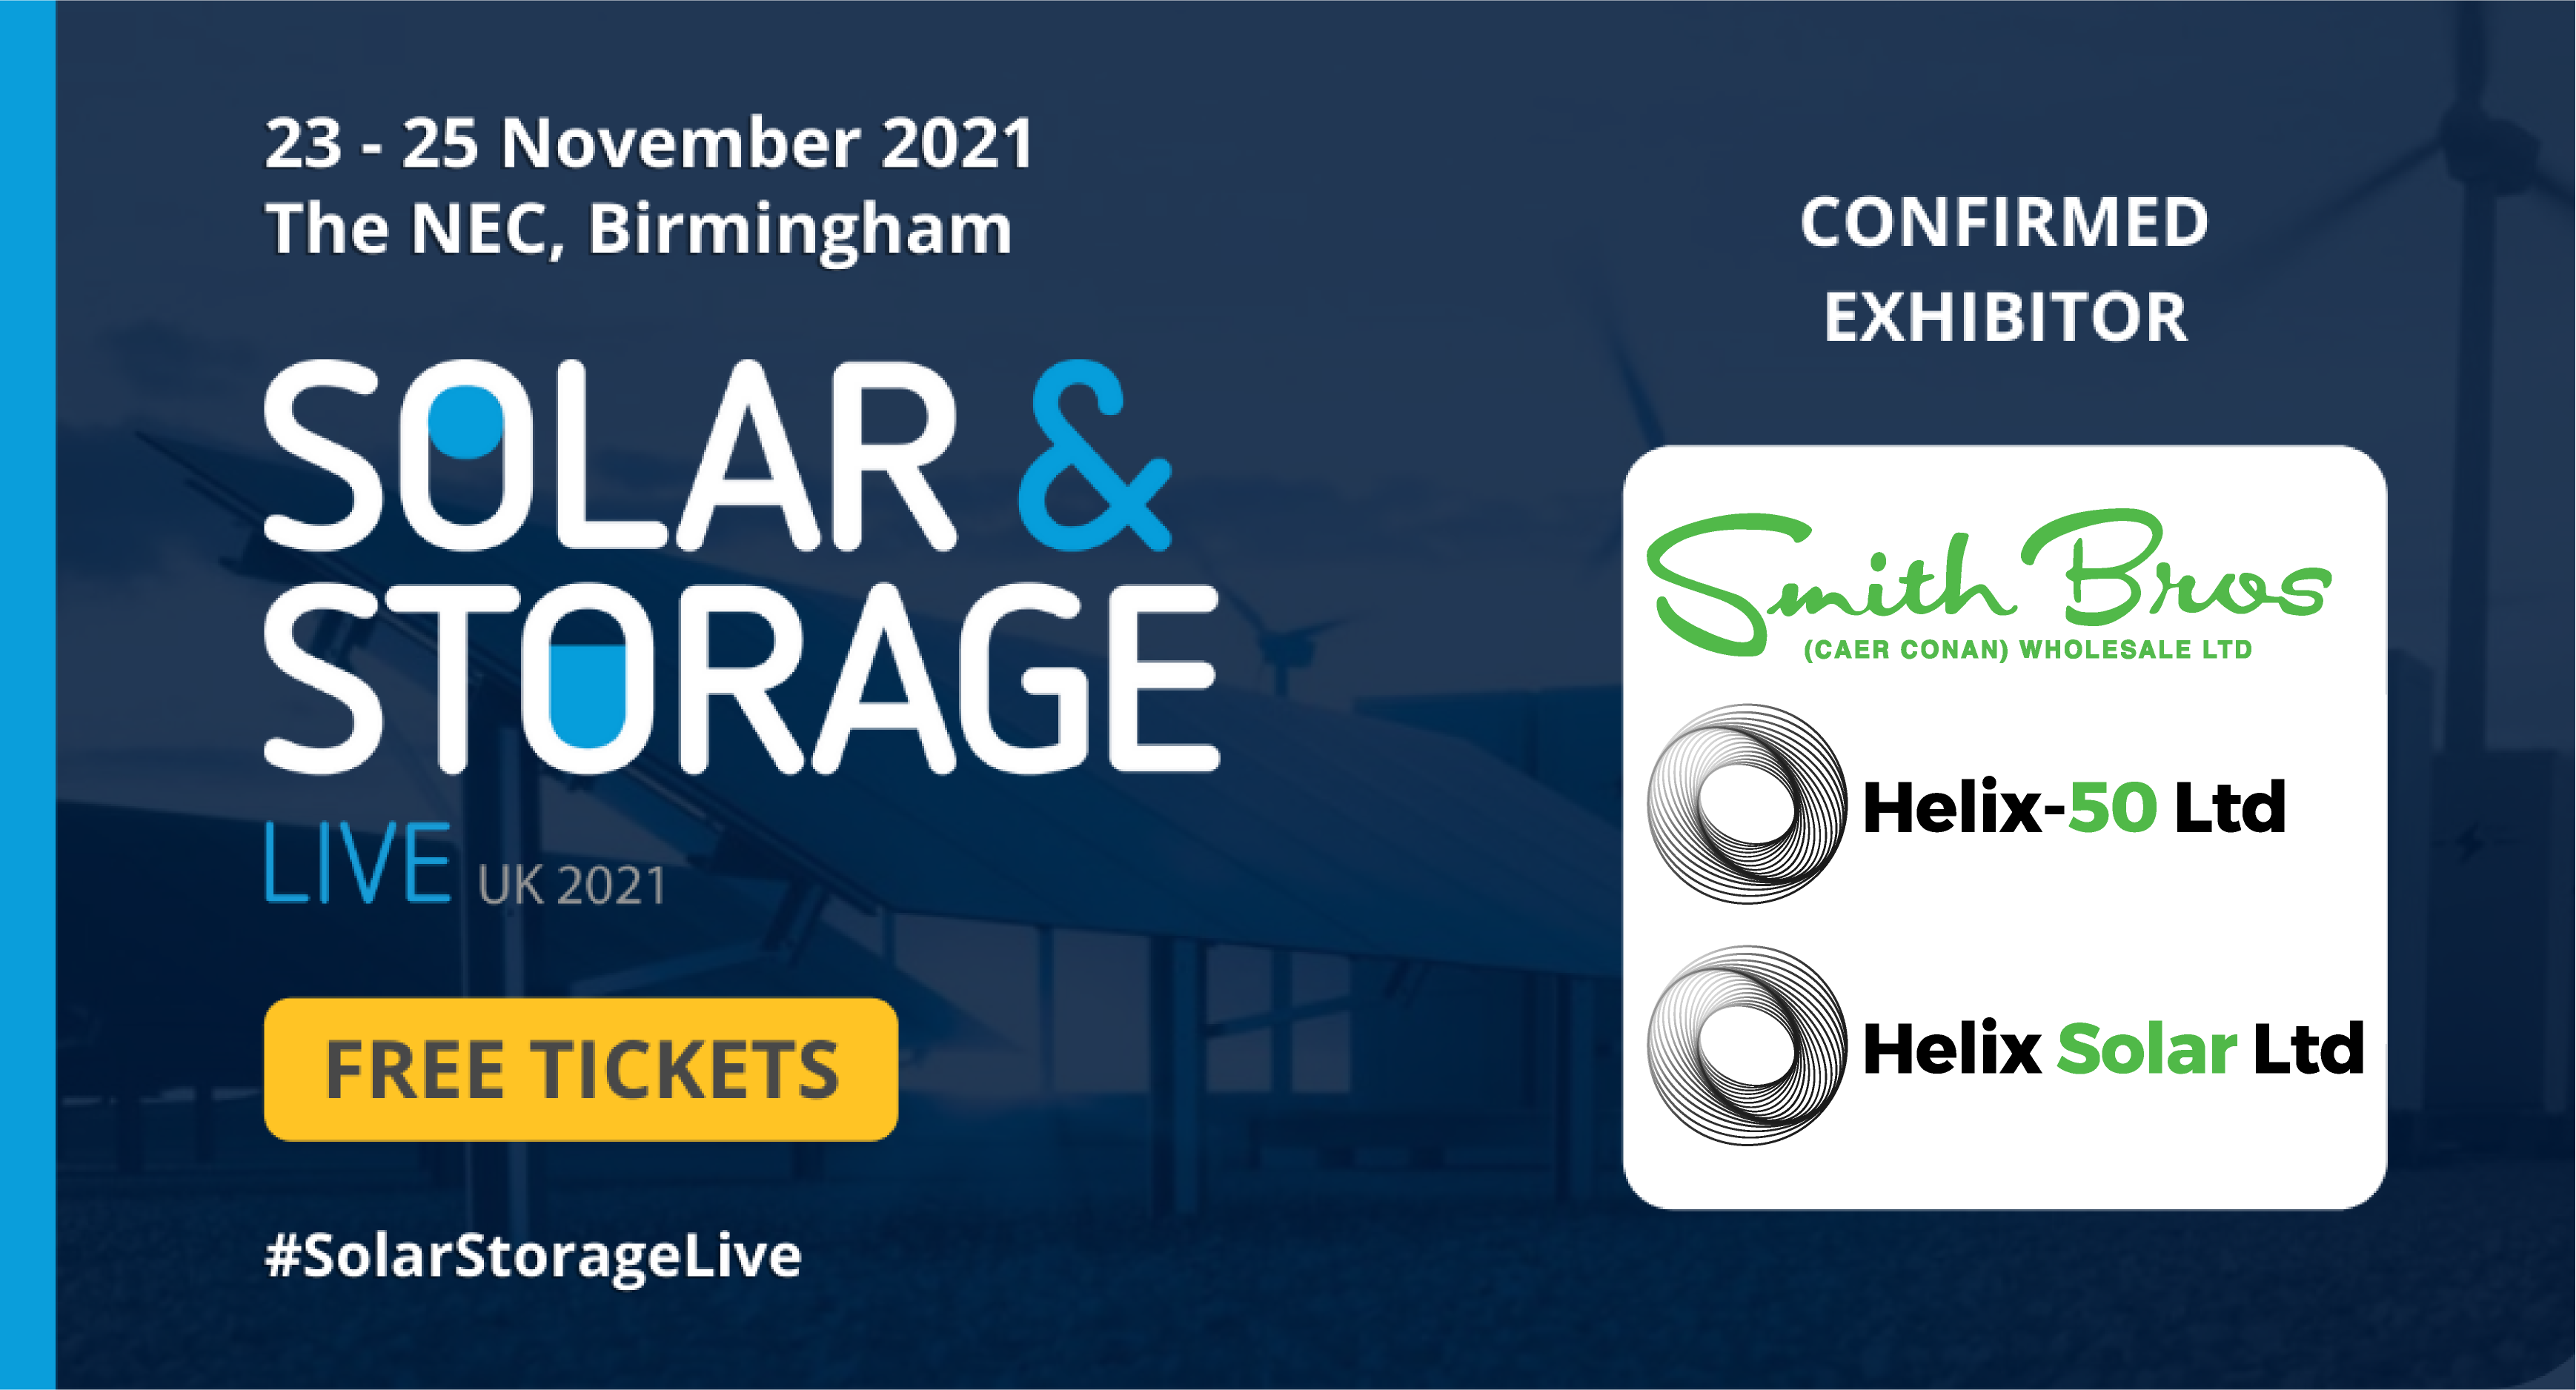 We're exhibiting at Solar & Storage Live 2021!